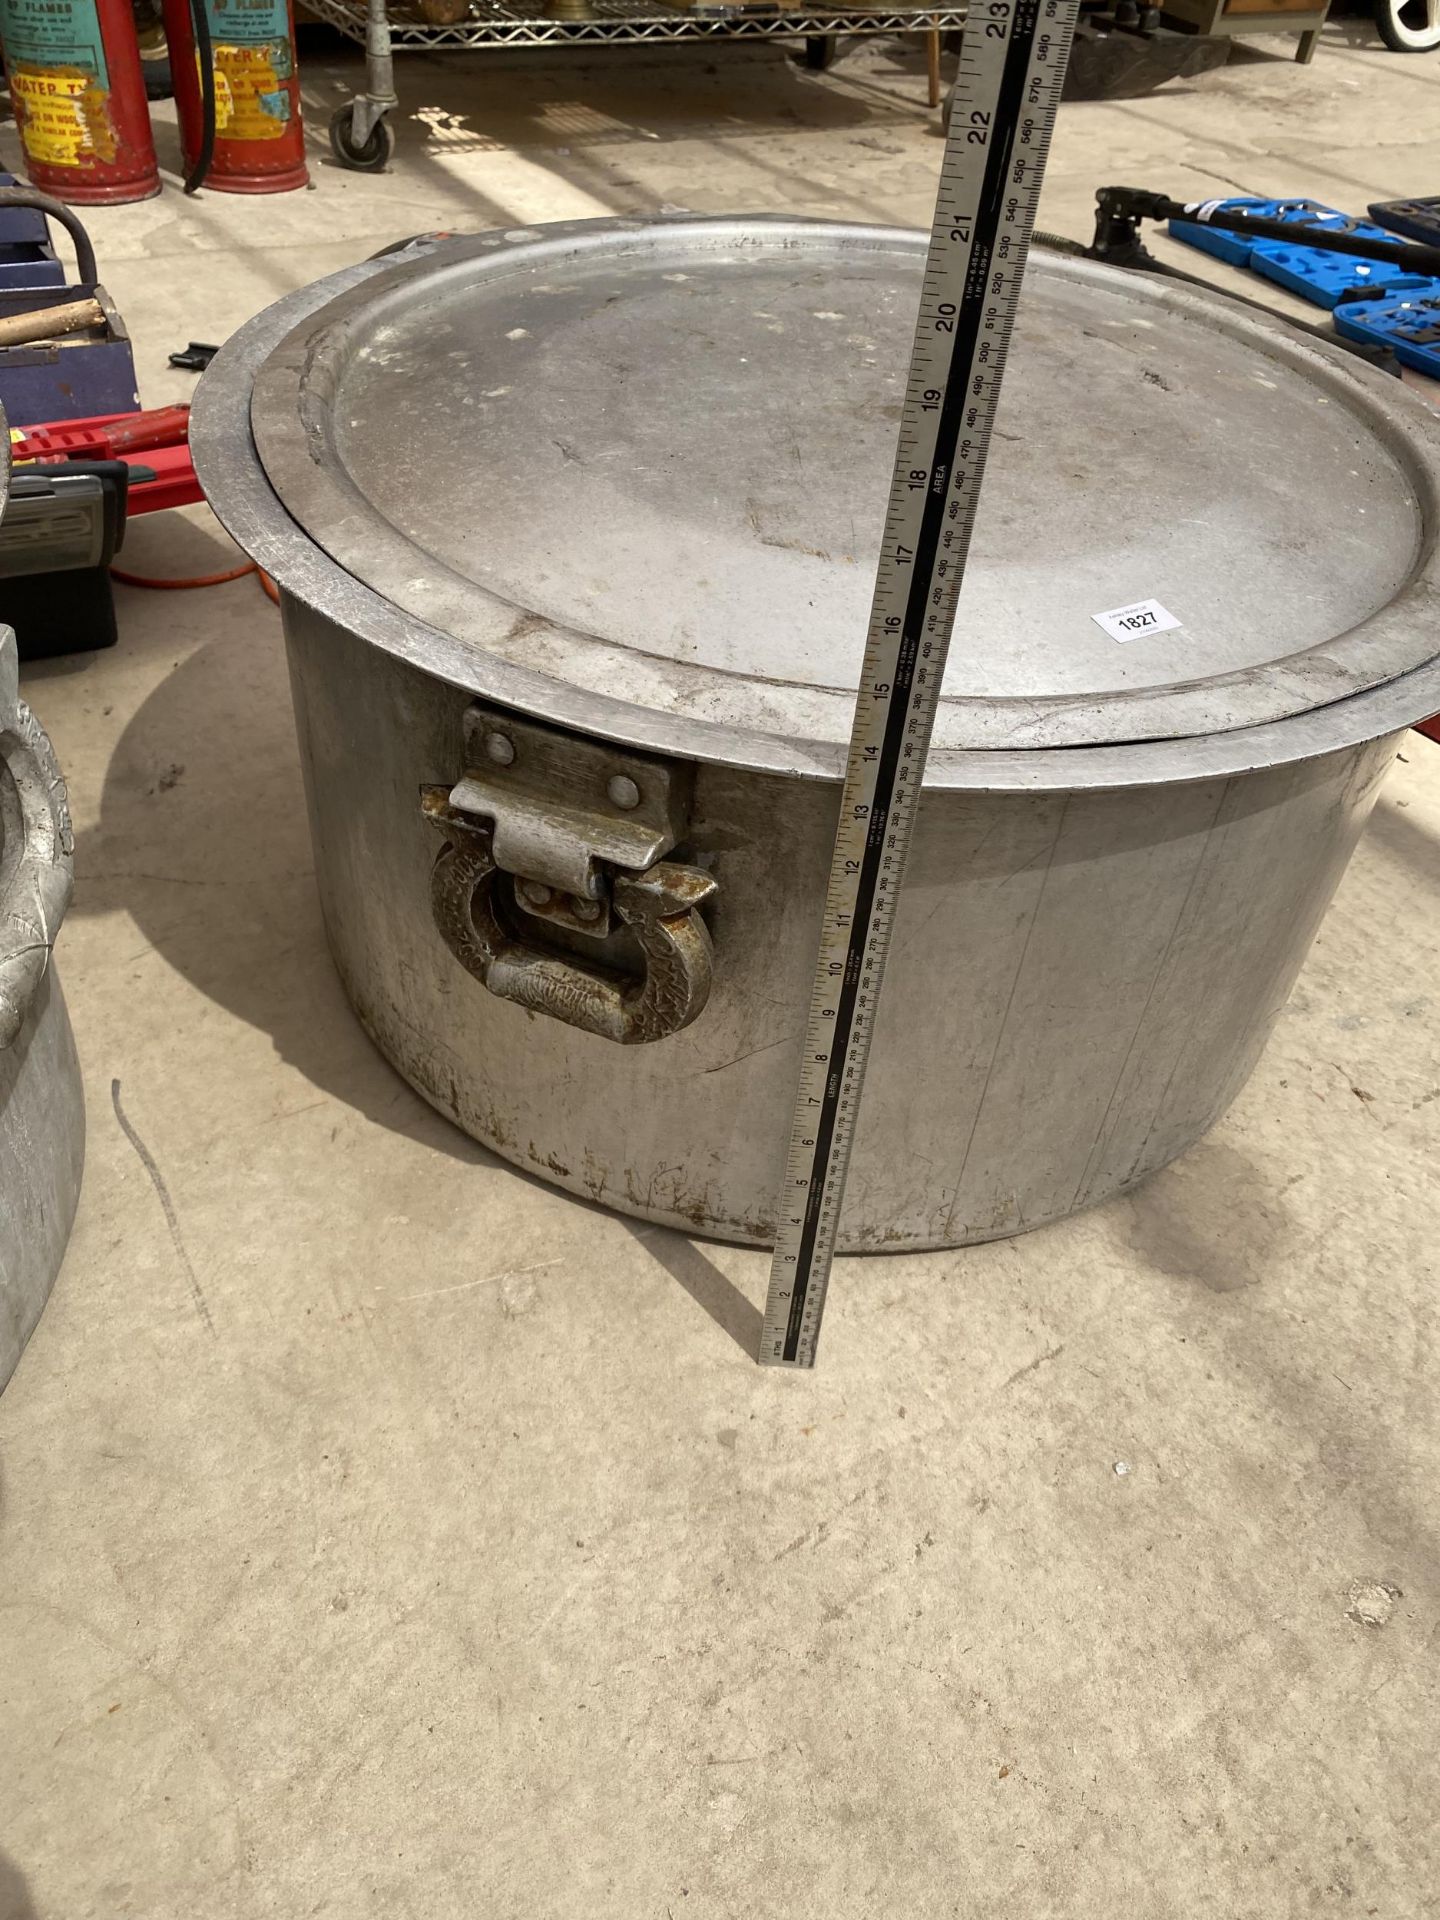 A LARGE STAINLESS STEEL COOKING POT WITH LID - Image 3 of 3